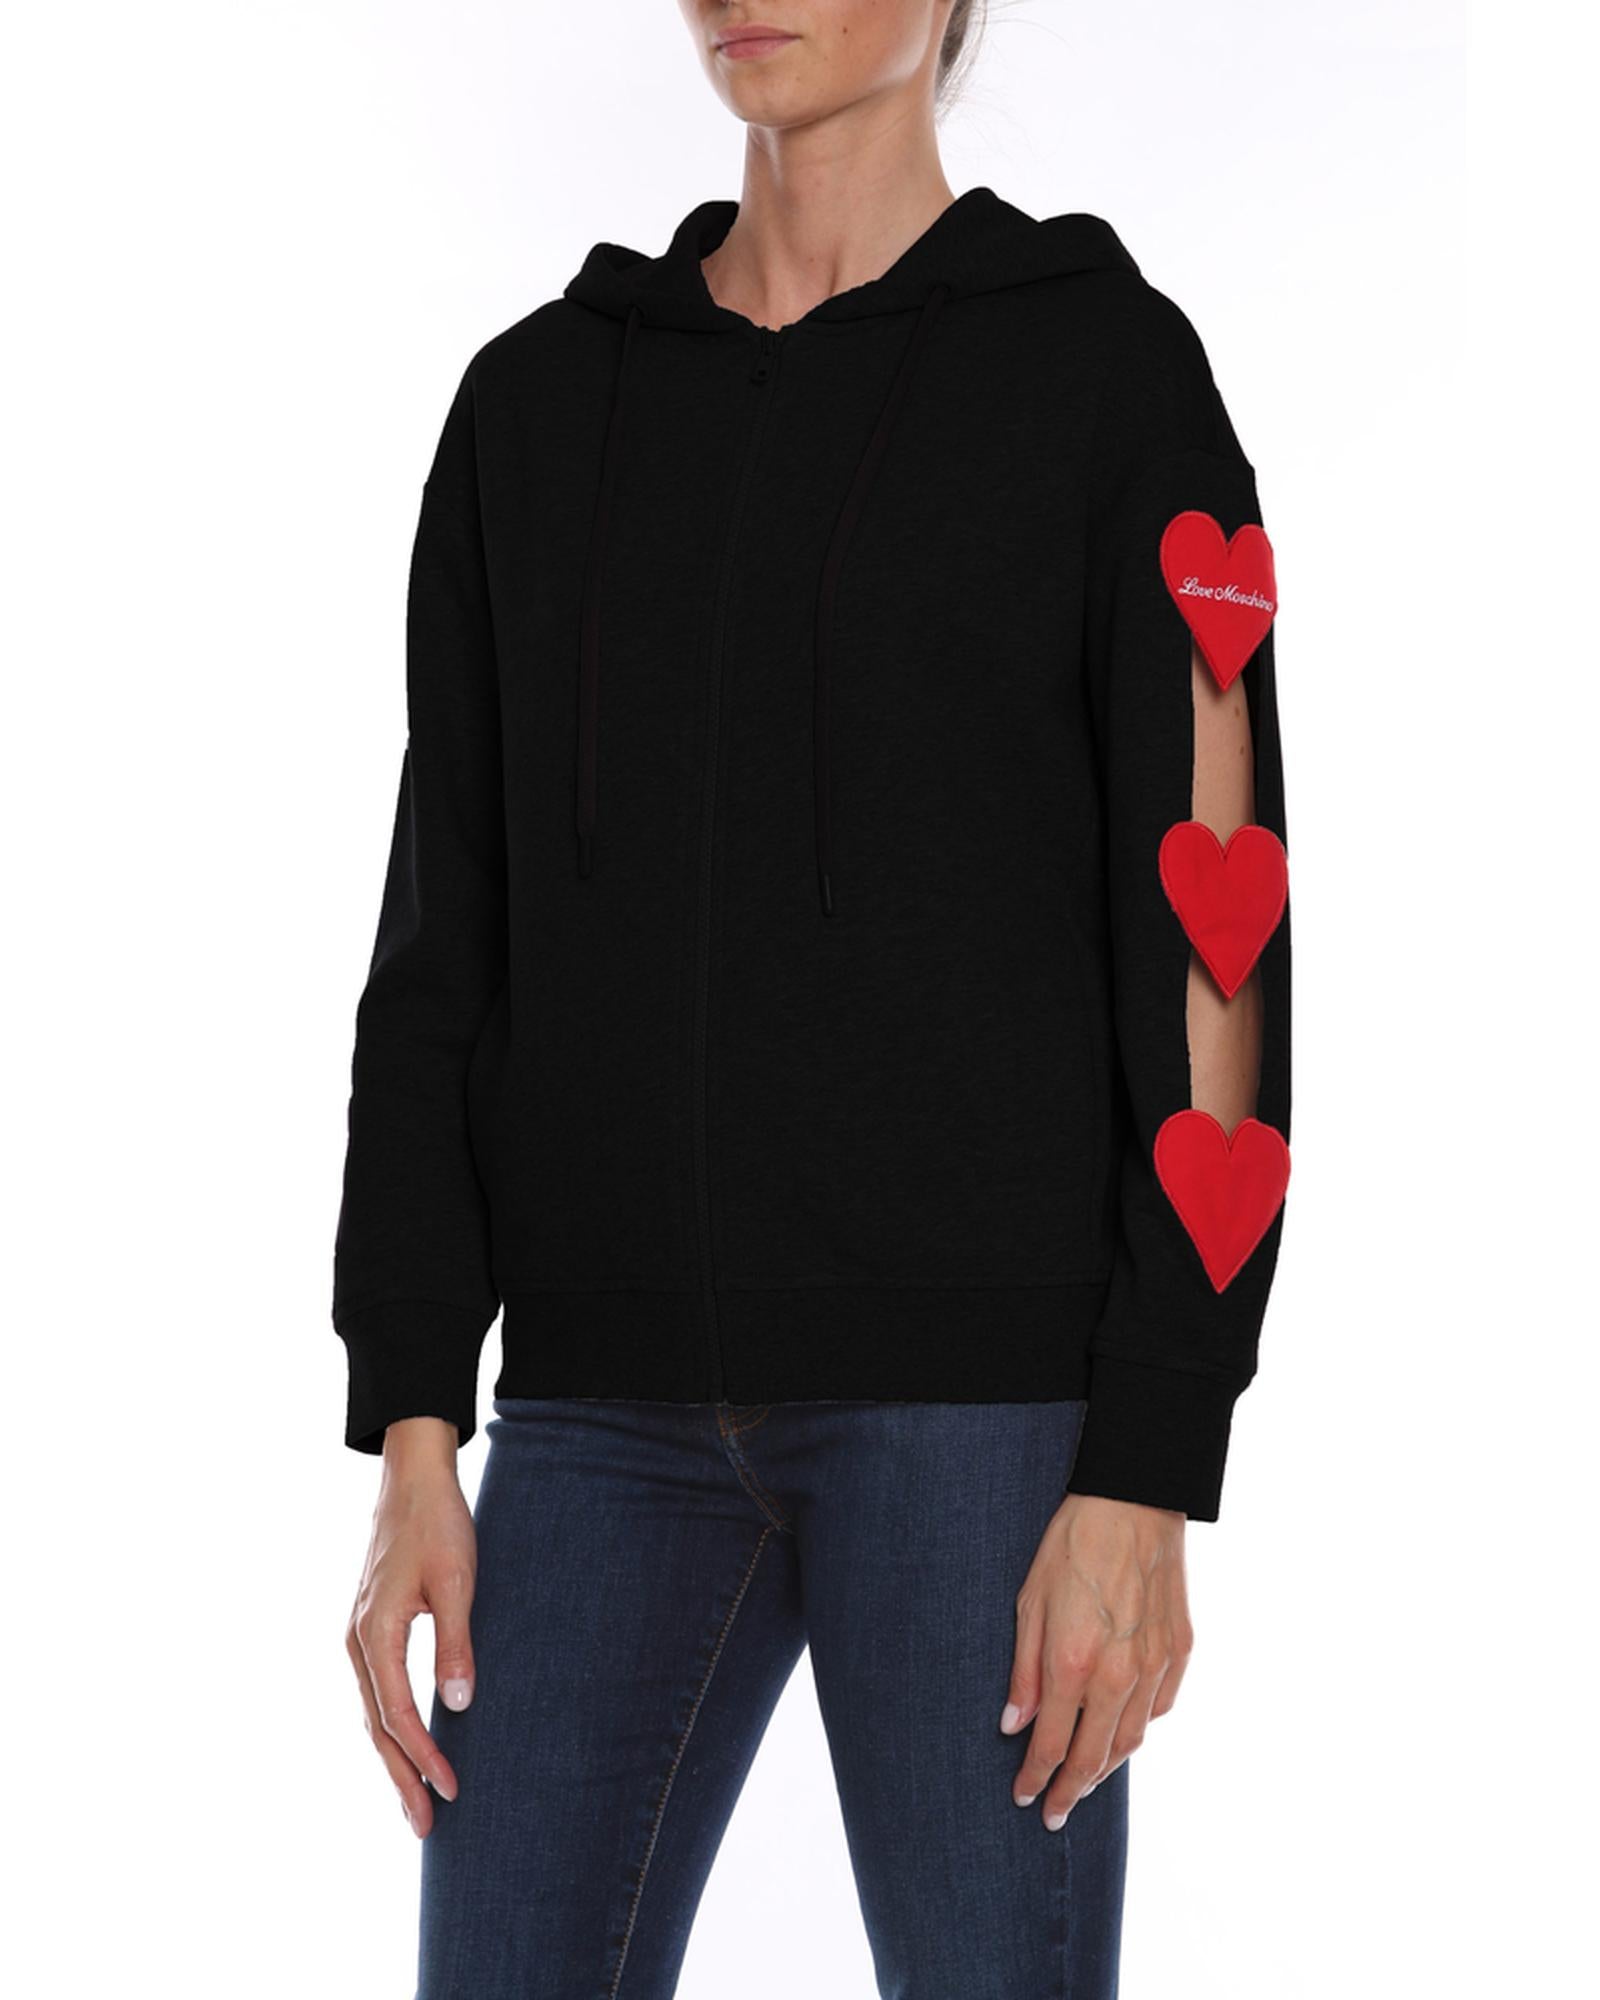 Cotton Sweatshirt with Hood and Embroidered Hearts 46 IT Women